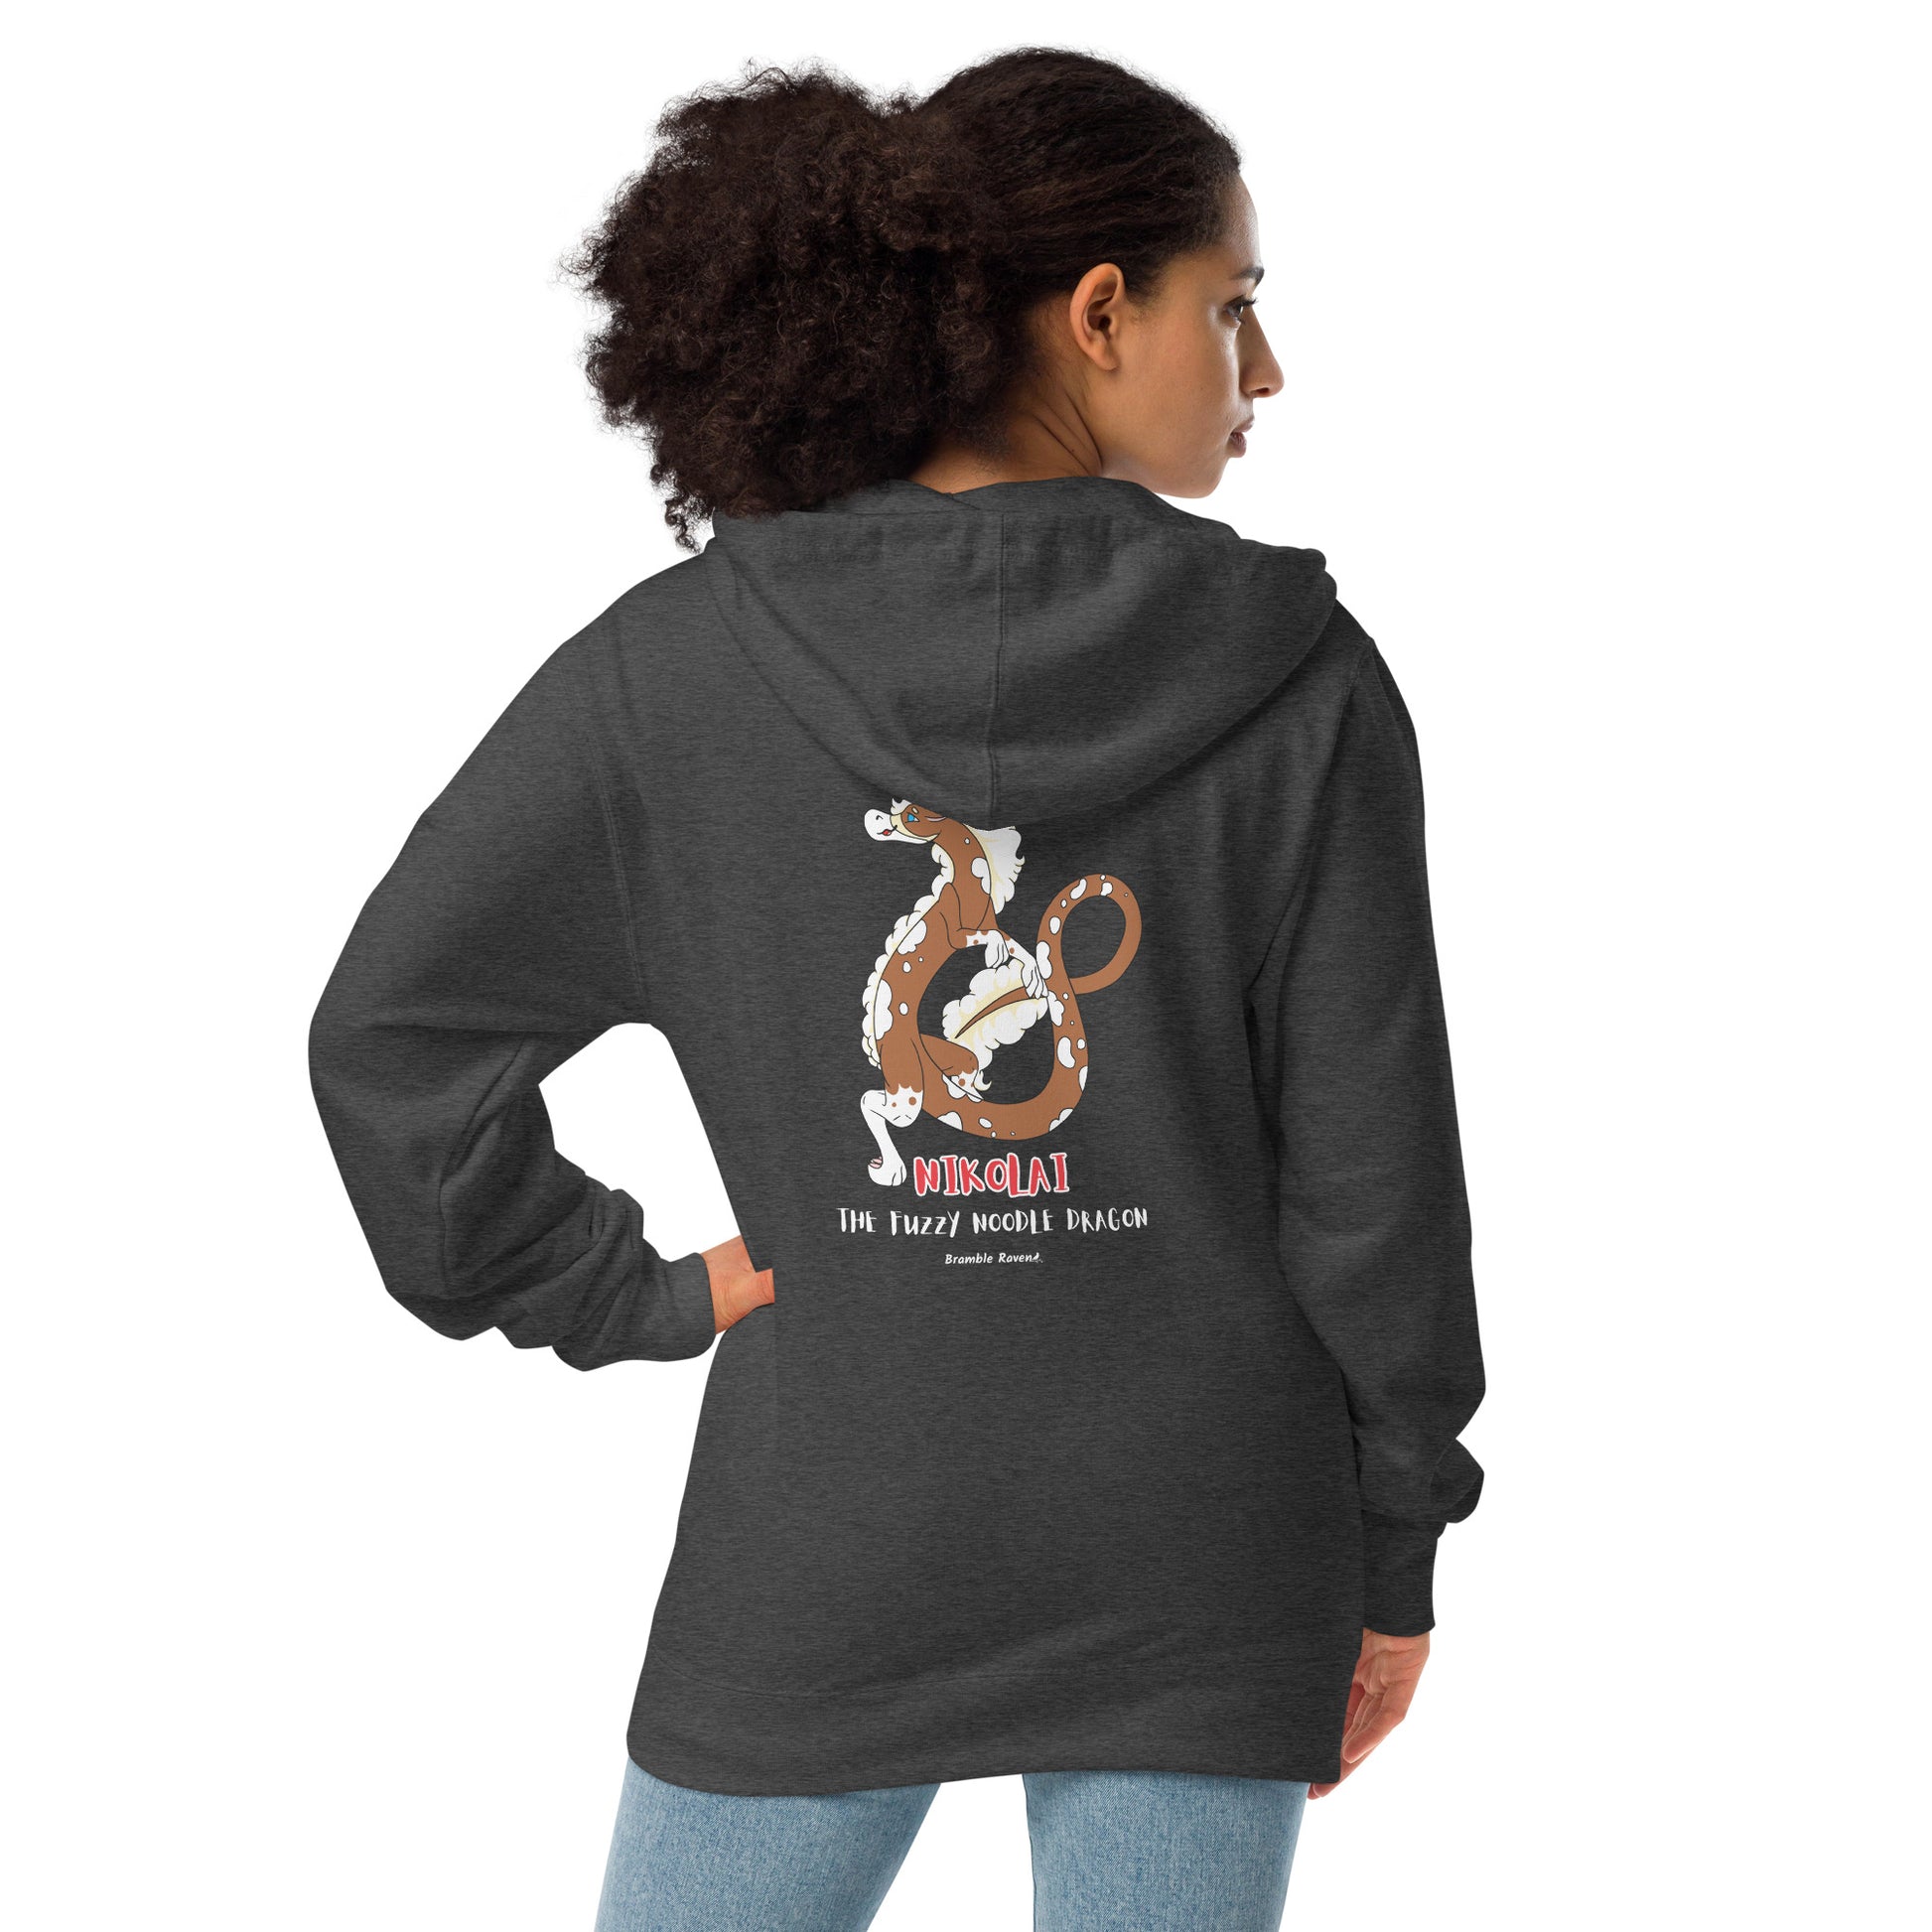 Charcoal heather colored unisex fleece zip-up hoodie. Features a back design of Nikolai the root beer float fuzzy noodle dragon. Back view shown on female model.